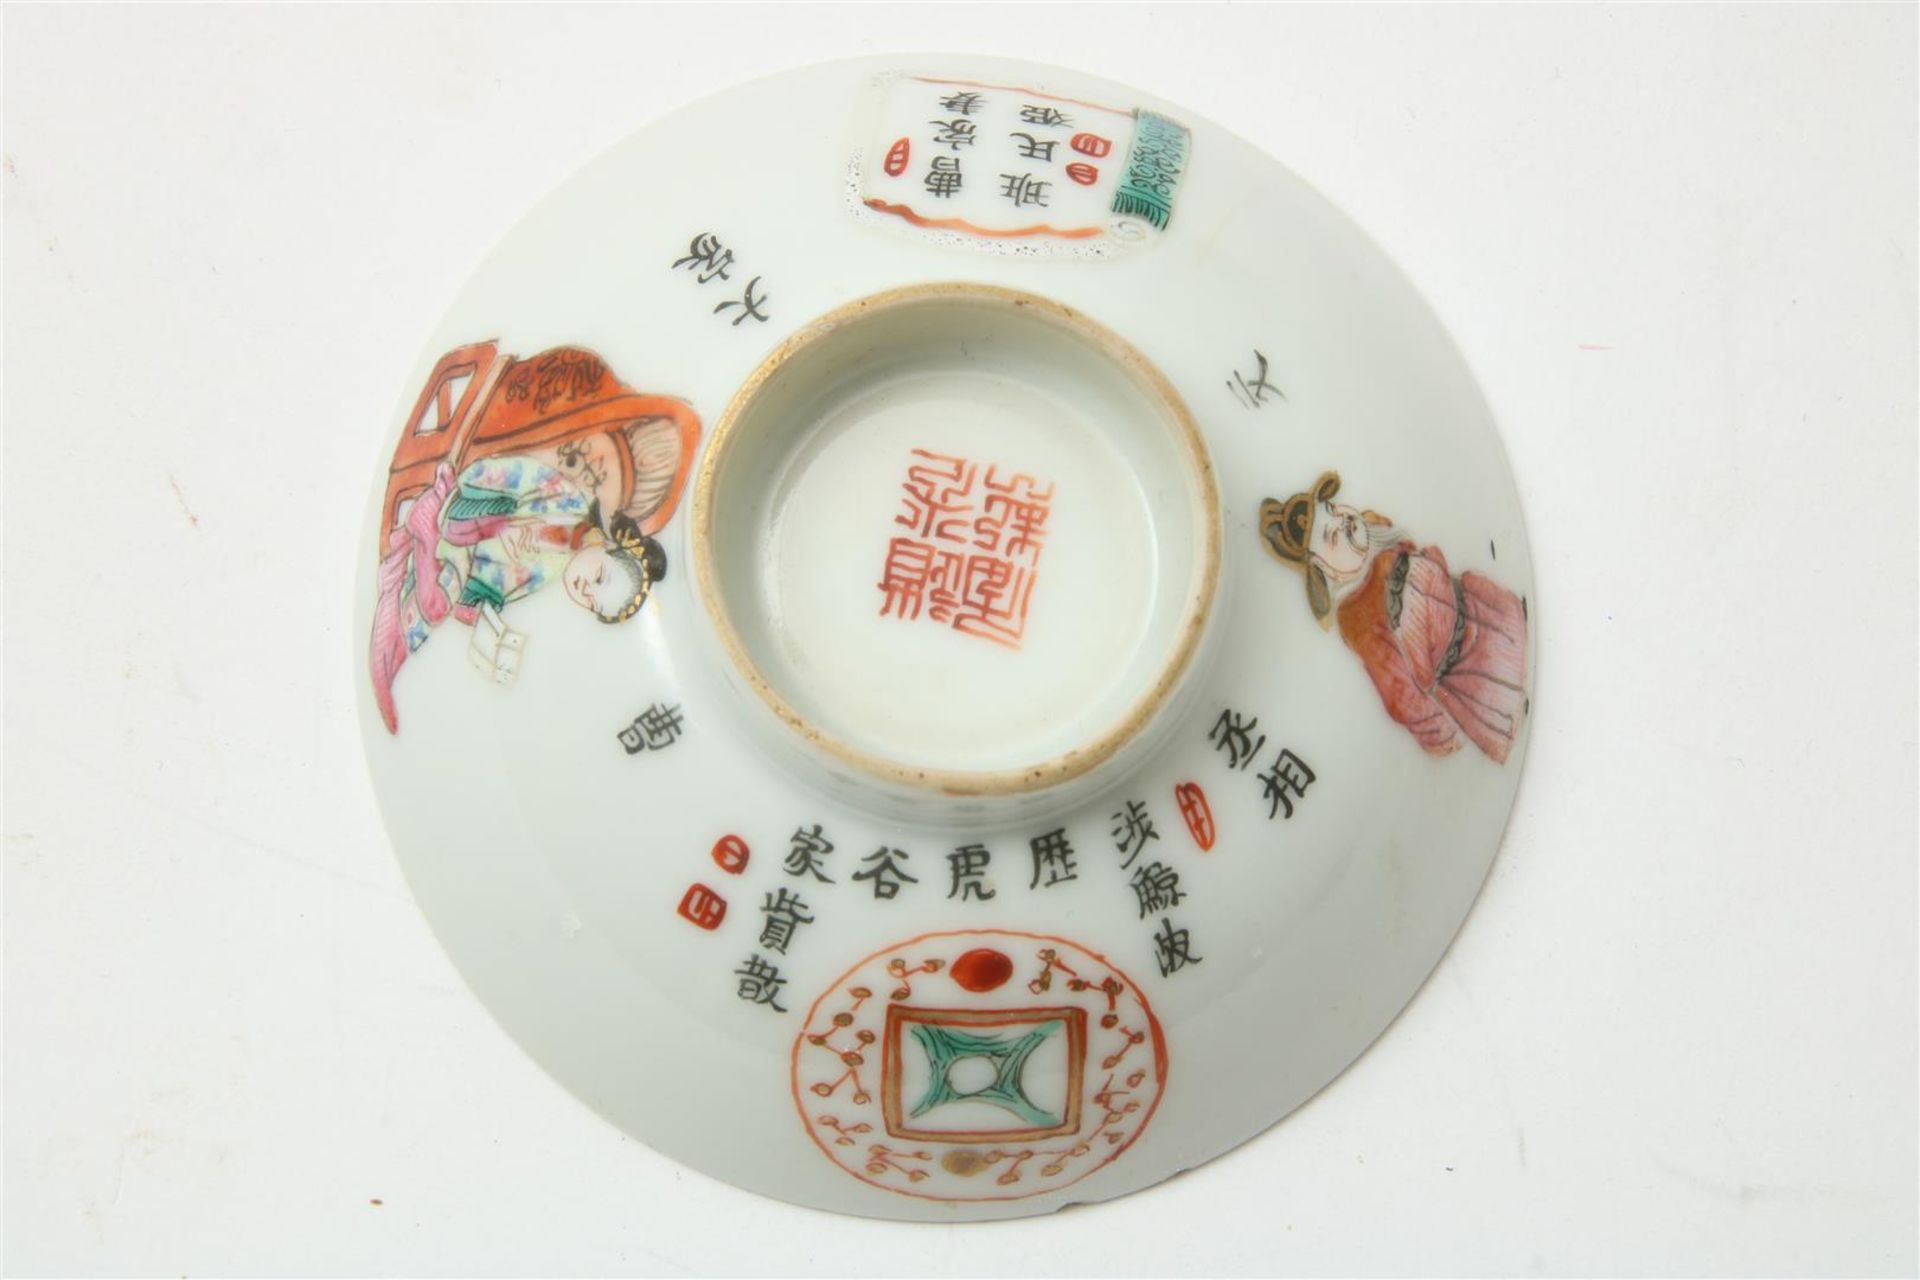 Porcelain bowl or lid, Xiangfeng, polychrome decorated with figures and Chinese characters, h. 3, - Image 2 of 5